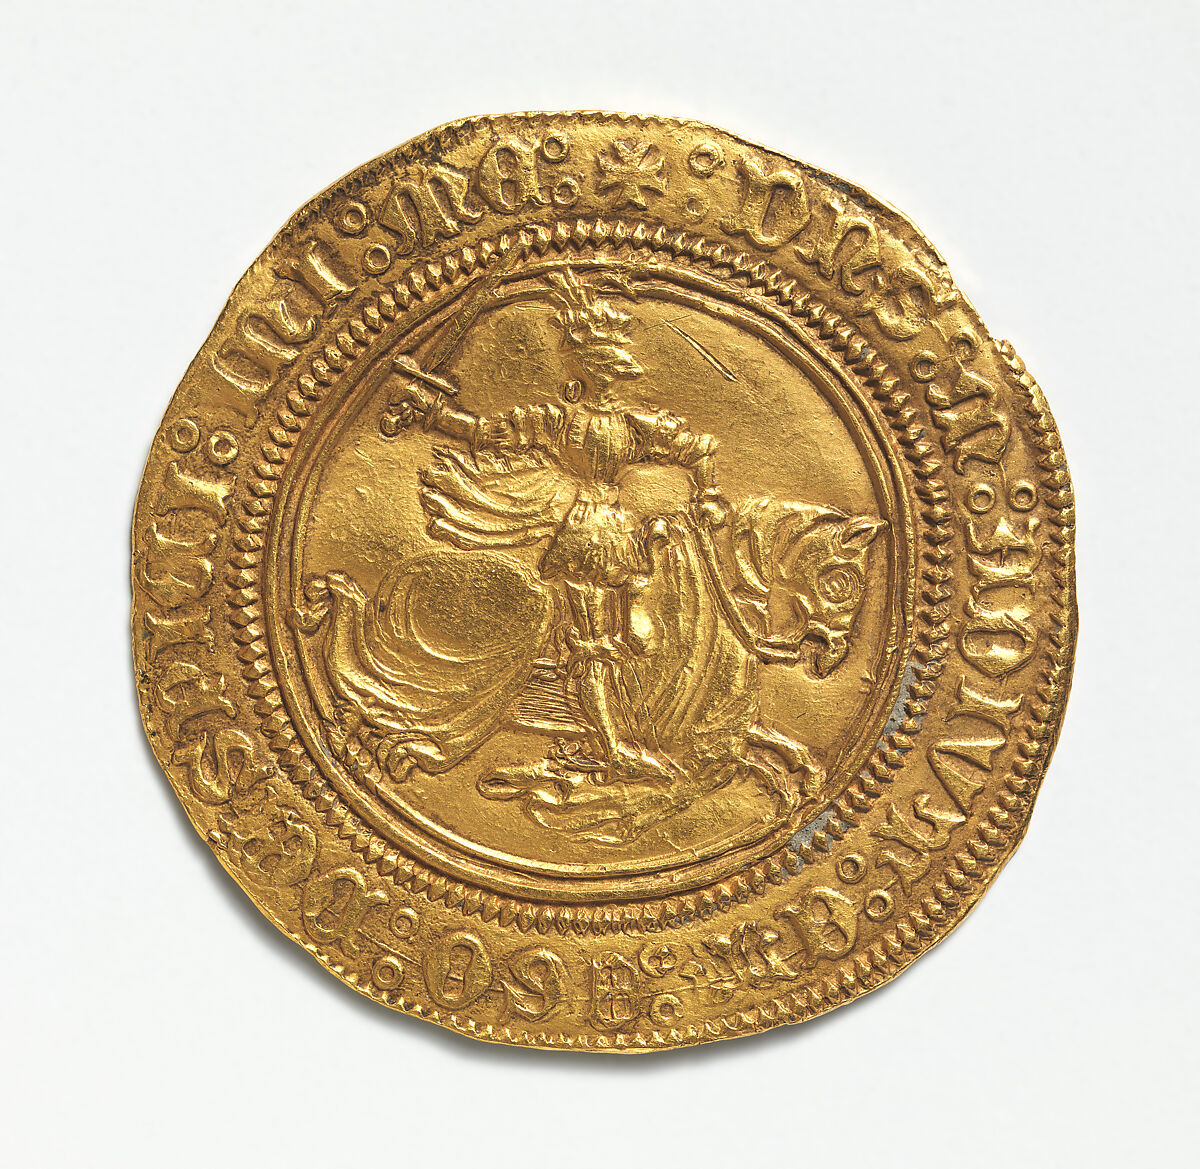 Dobla of Alfonso of Aragon (r. 1465–68), also known as Alfonso I of Naples (r. 1442–58), Gold, Spanish and Italian 